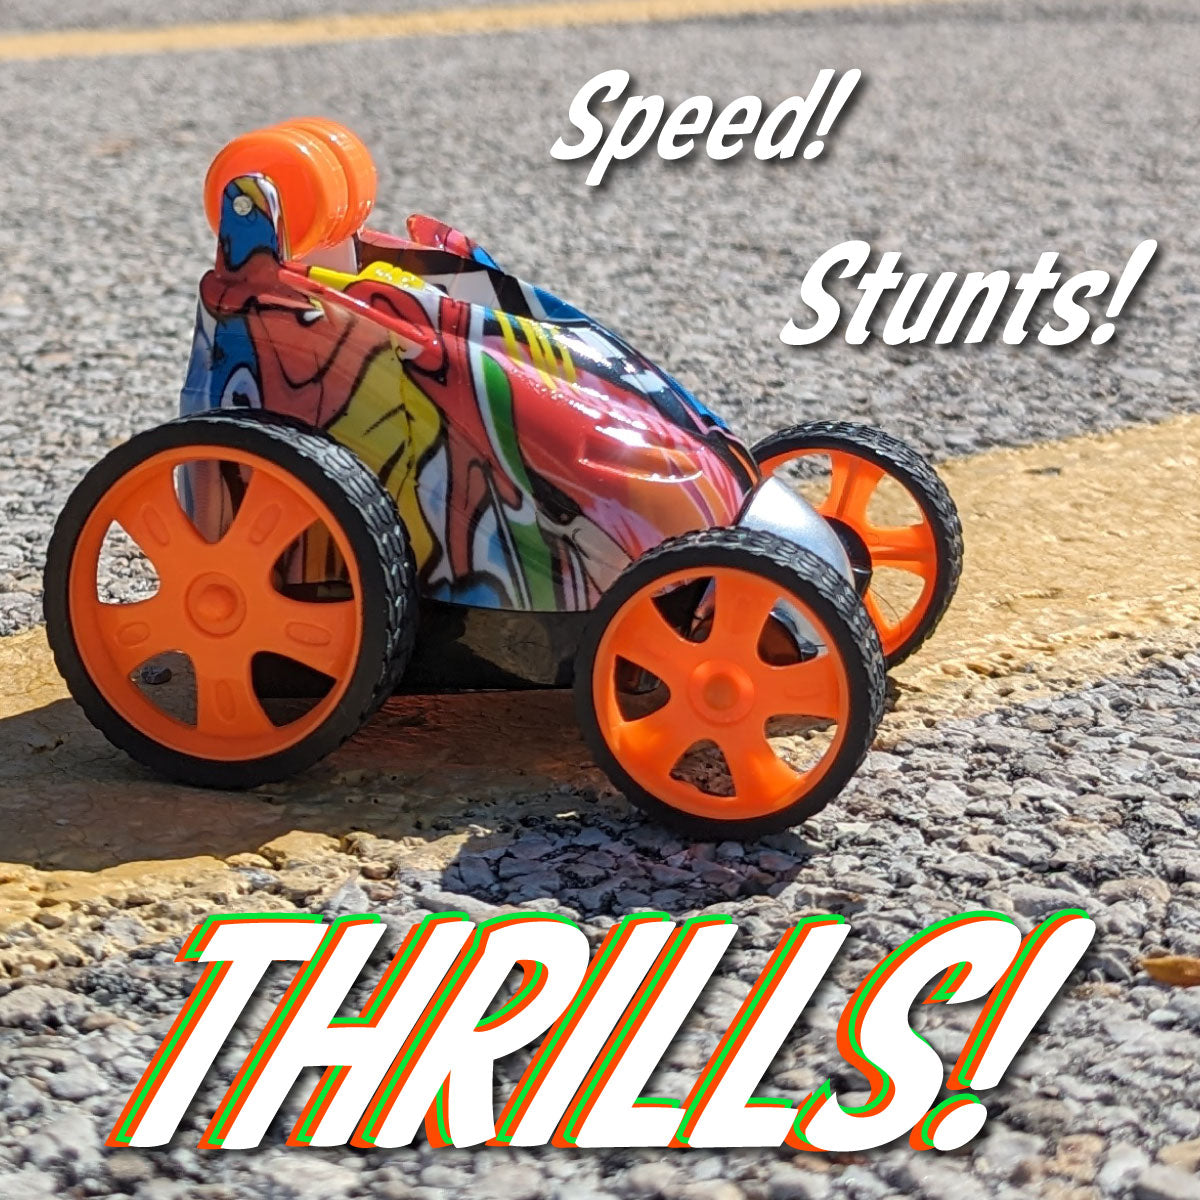 Remote Control means Speed, Stunts, and THRILLS!